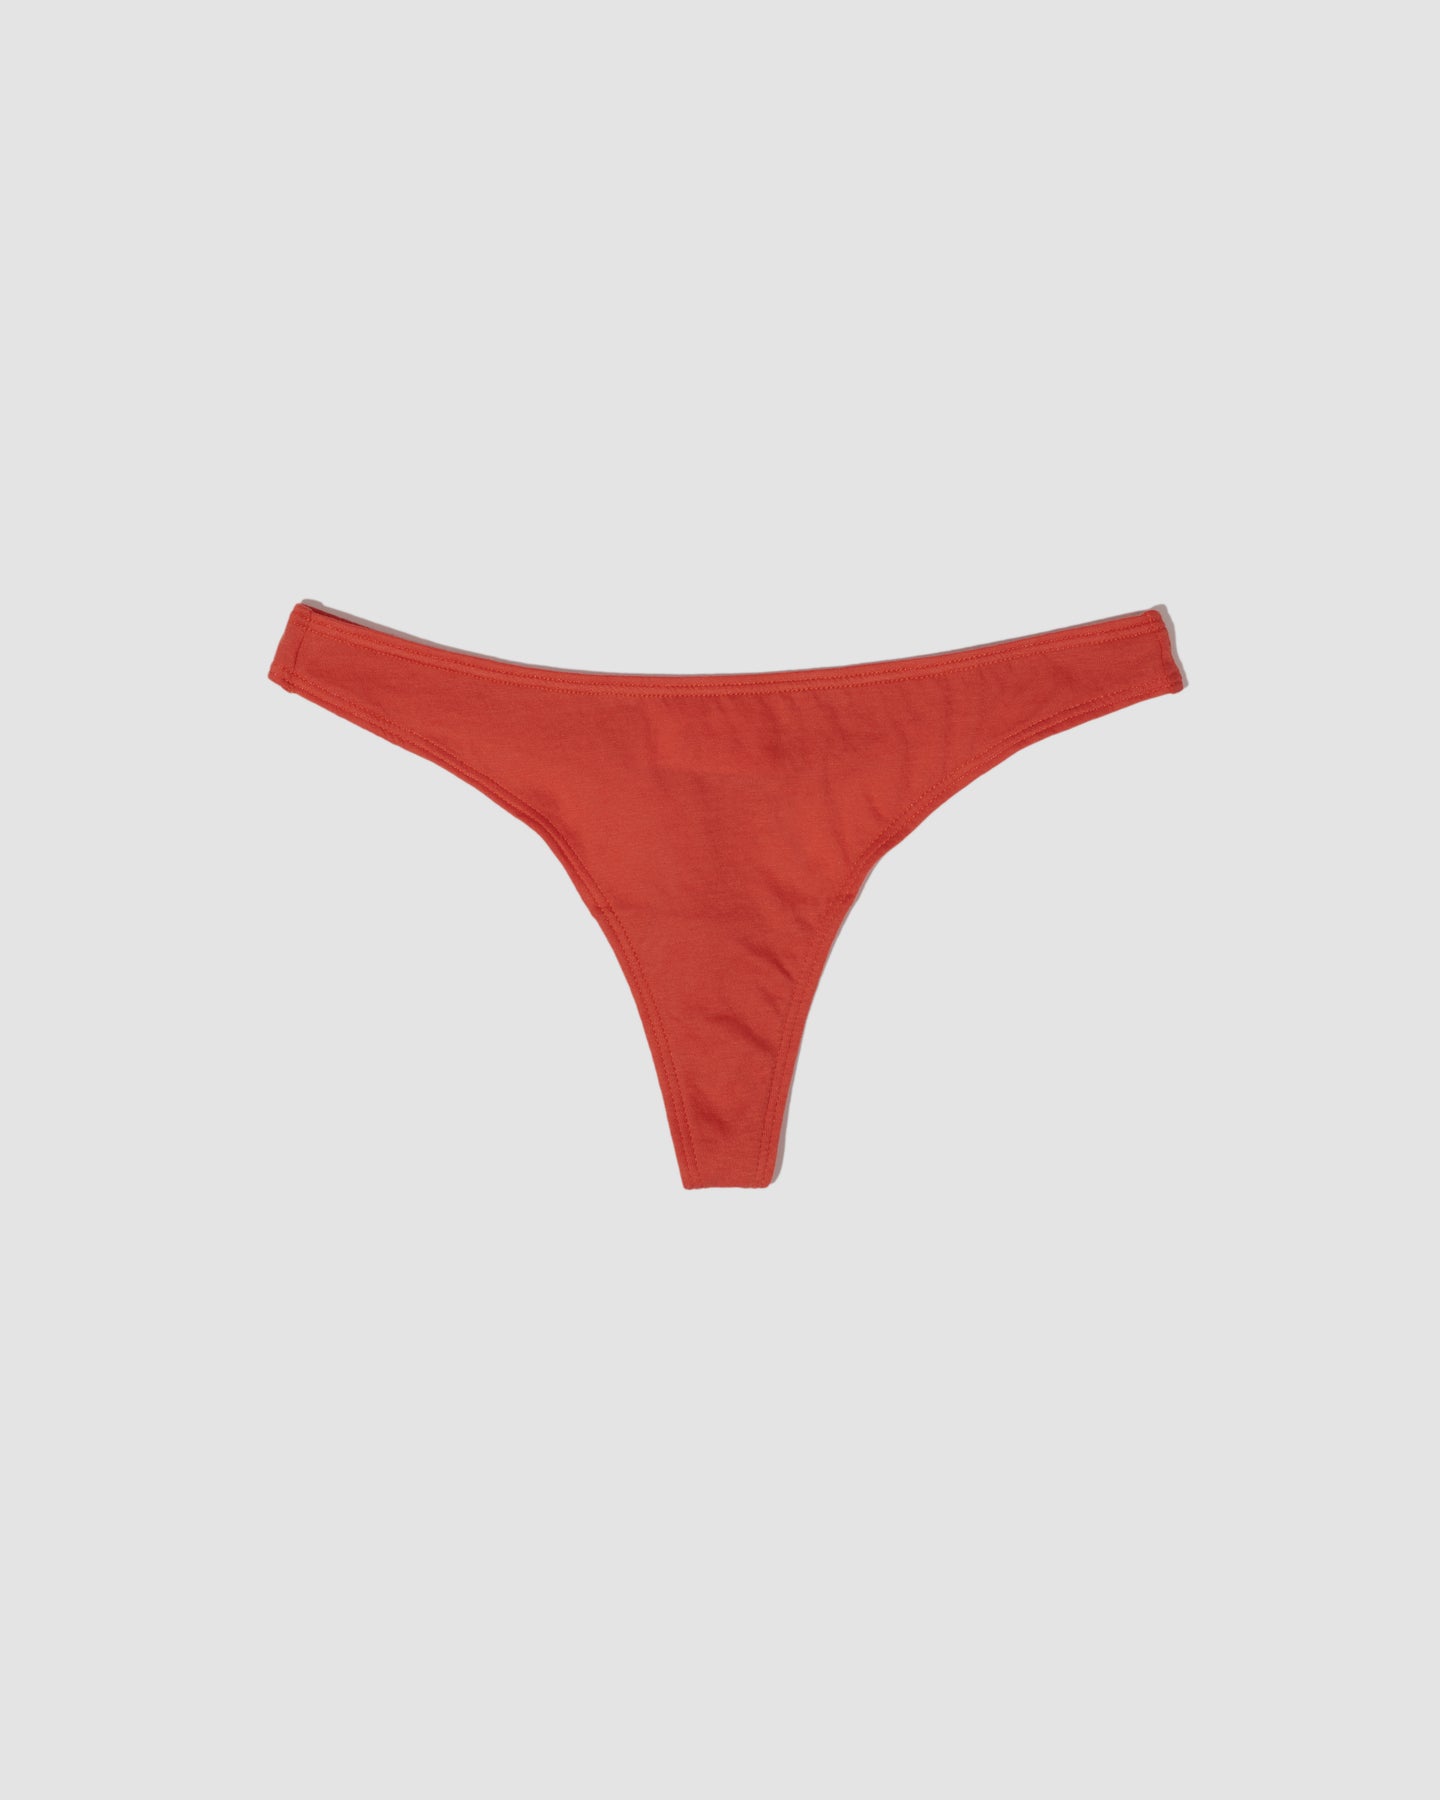 NWT Wolford 69868 Antoinette Microfiber Laser Cut Thong, White / Red  Print, XS